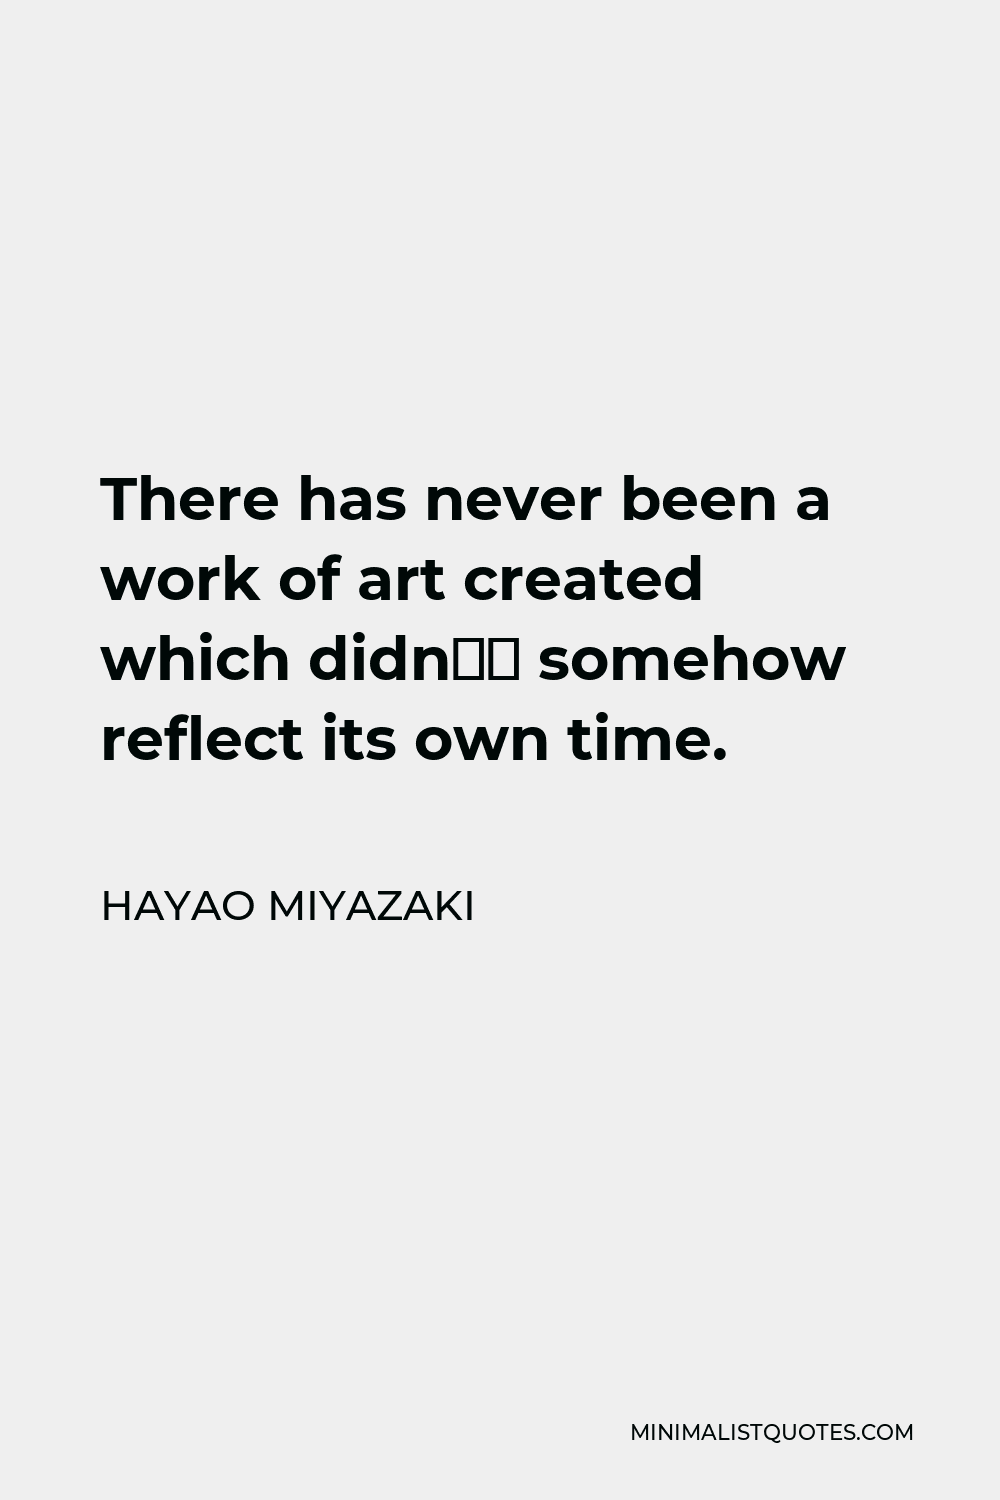 Hayao Miyazaki Quote - There has never been a work of art created which didn’t somehow reflect its own time.